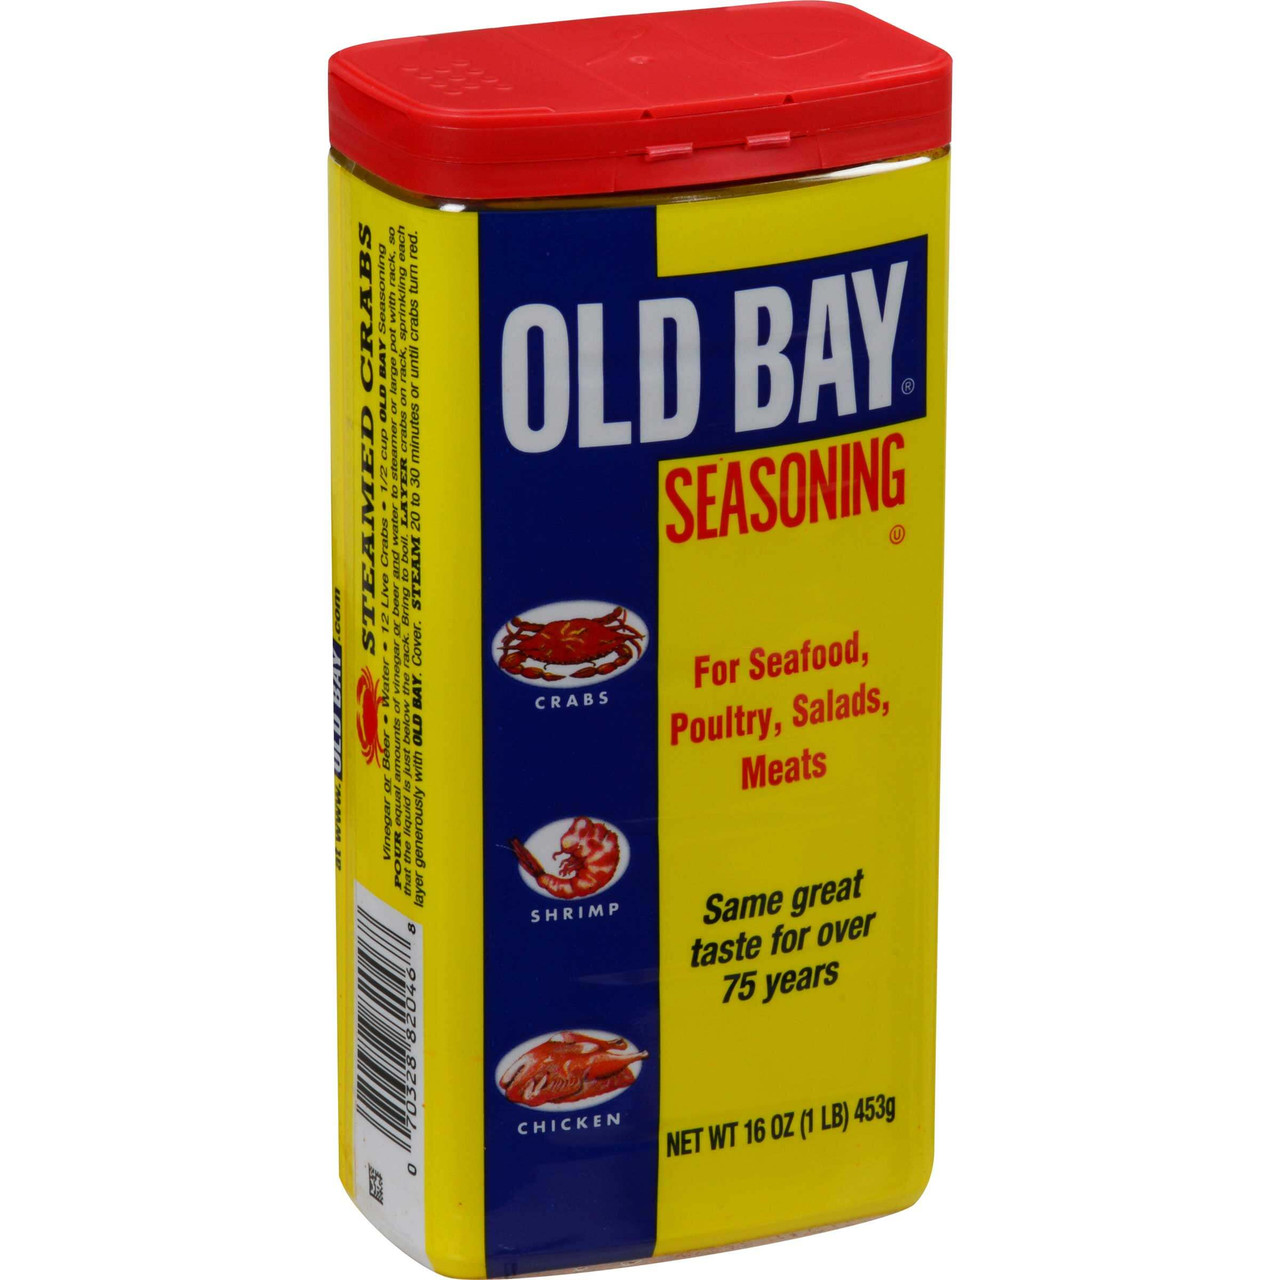 Old Bay 1 lb. Seasoning - 12/Case - Unique Blend of 18 Herbs and Spices - Chicken Pieces